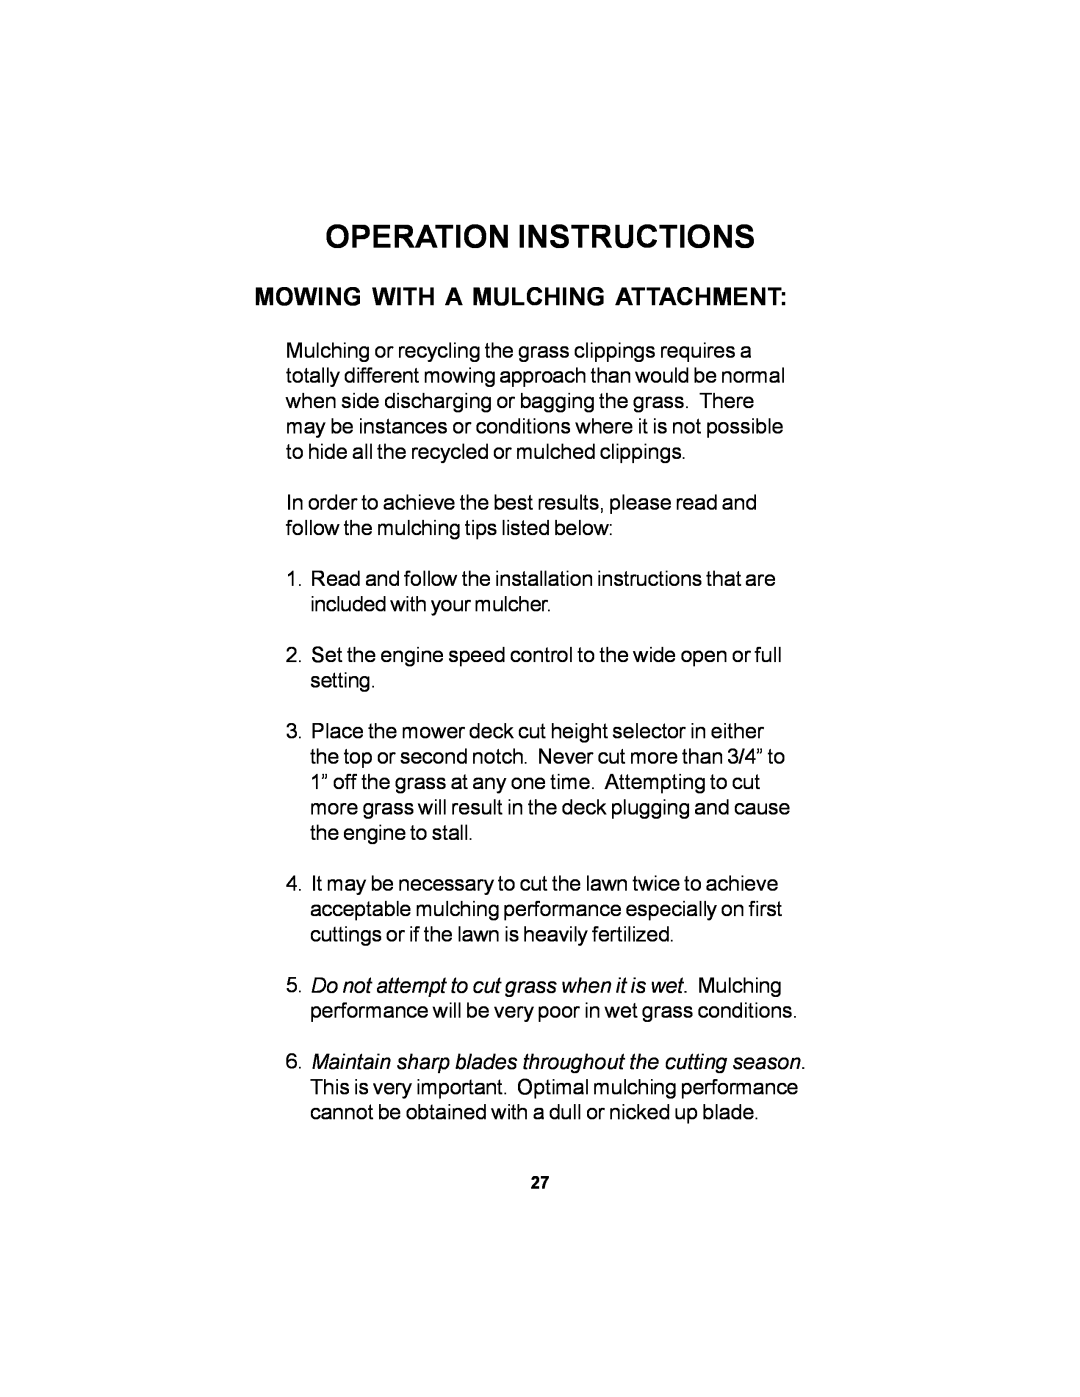 Dixon 11249-106 manual Mowing With A Mulching Attachment, Operation Instructions 